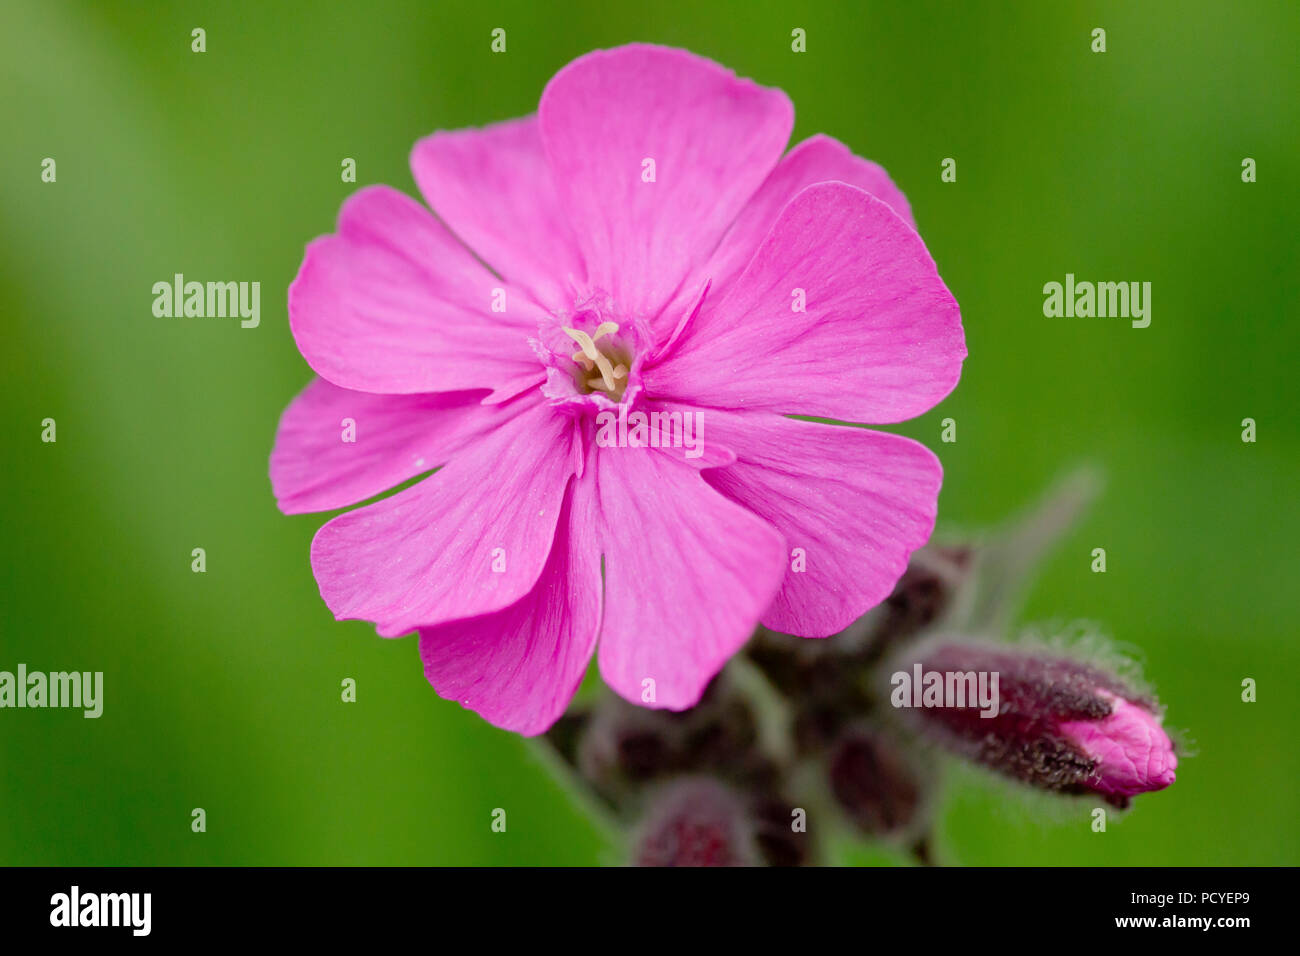 Red Campion (silene dioica), close up of single flower with bud. This is the male flower. Stock Photo